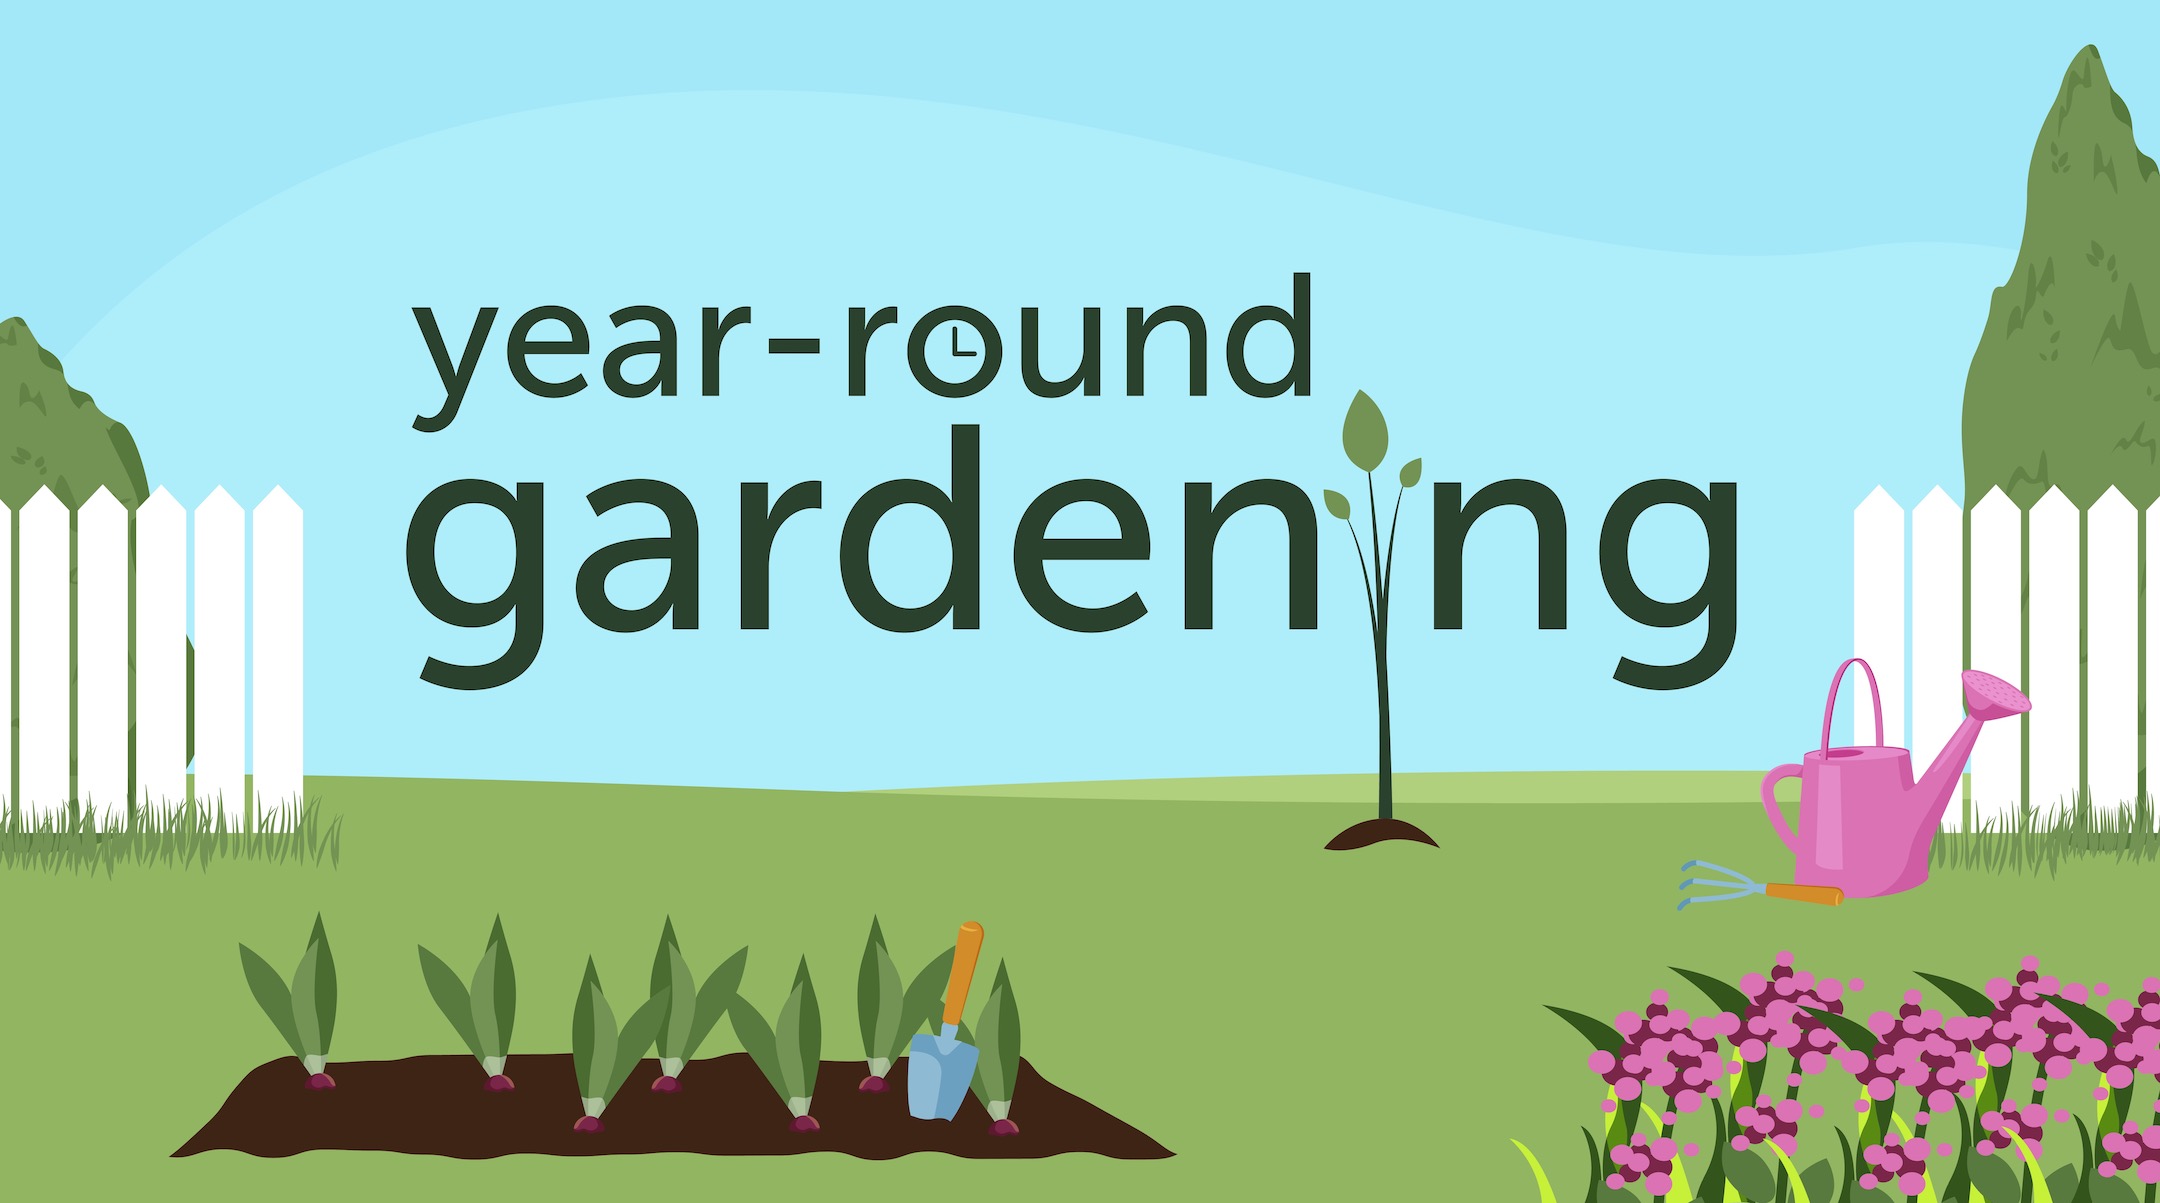 An illustration of a green vegetable garden and a blue sky with the words "year-round gardening"